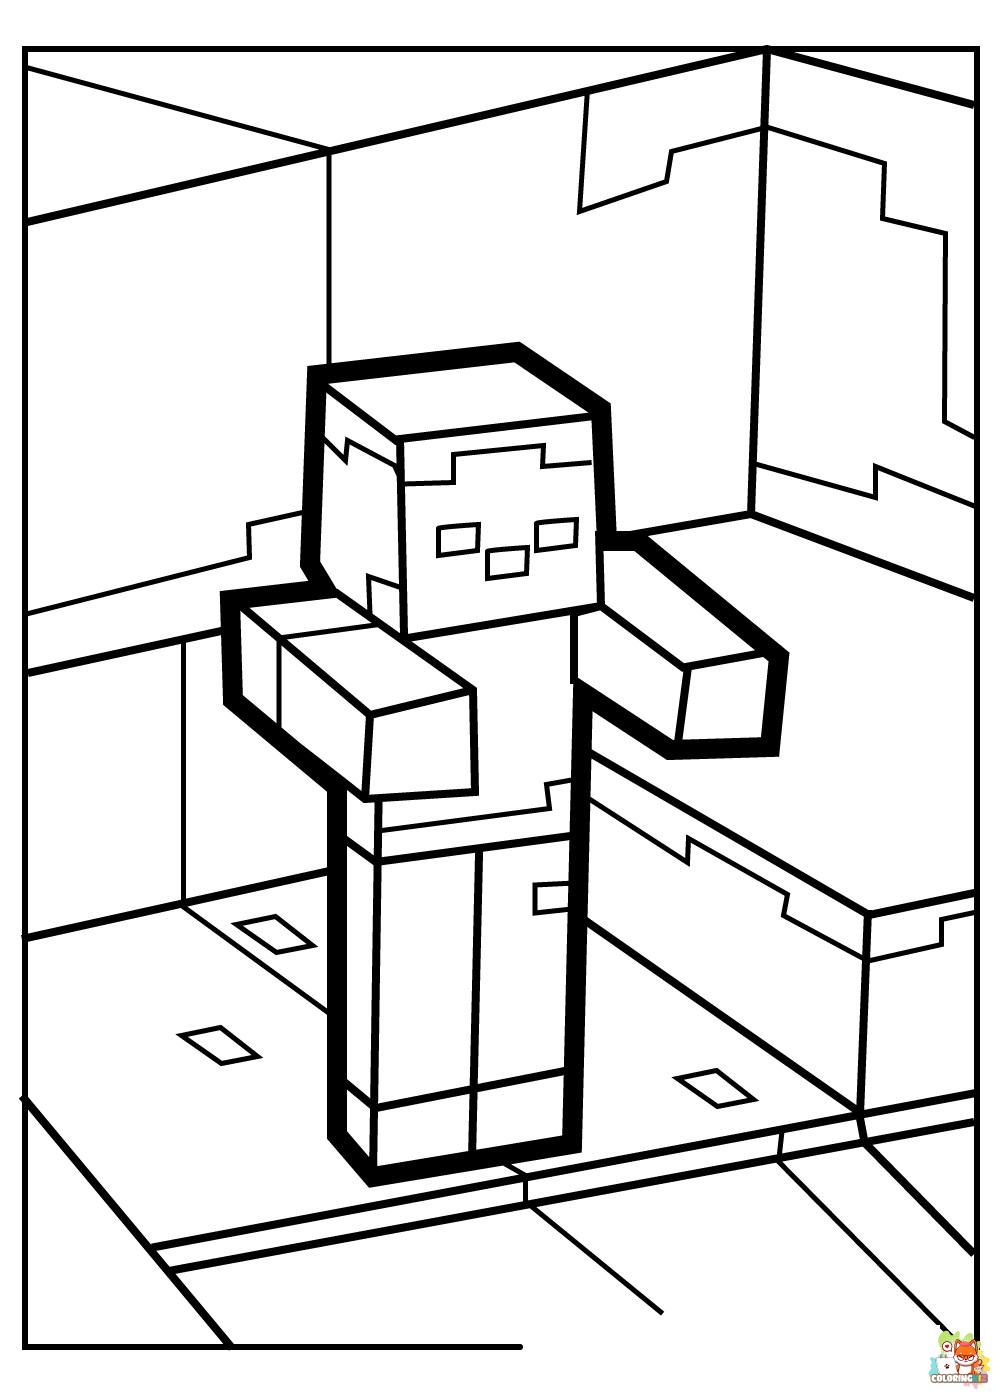 Zombie Minecraft Coloring Pages 2